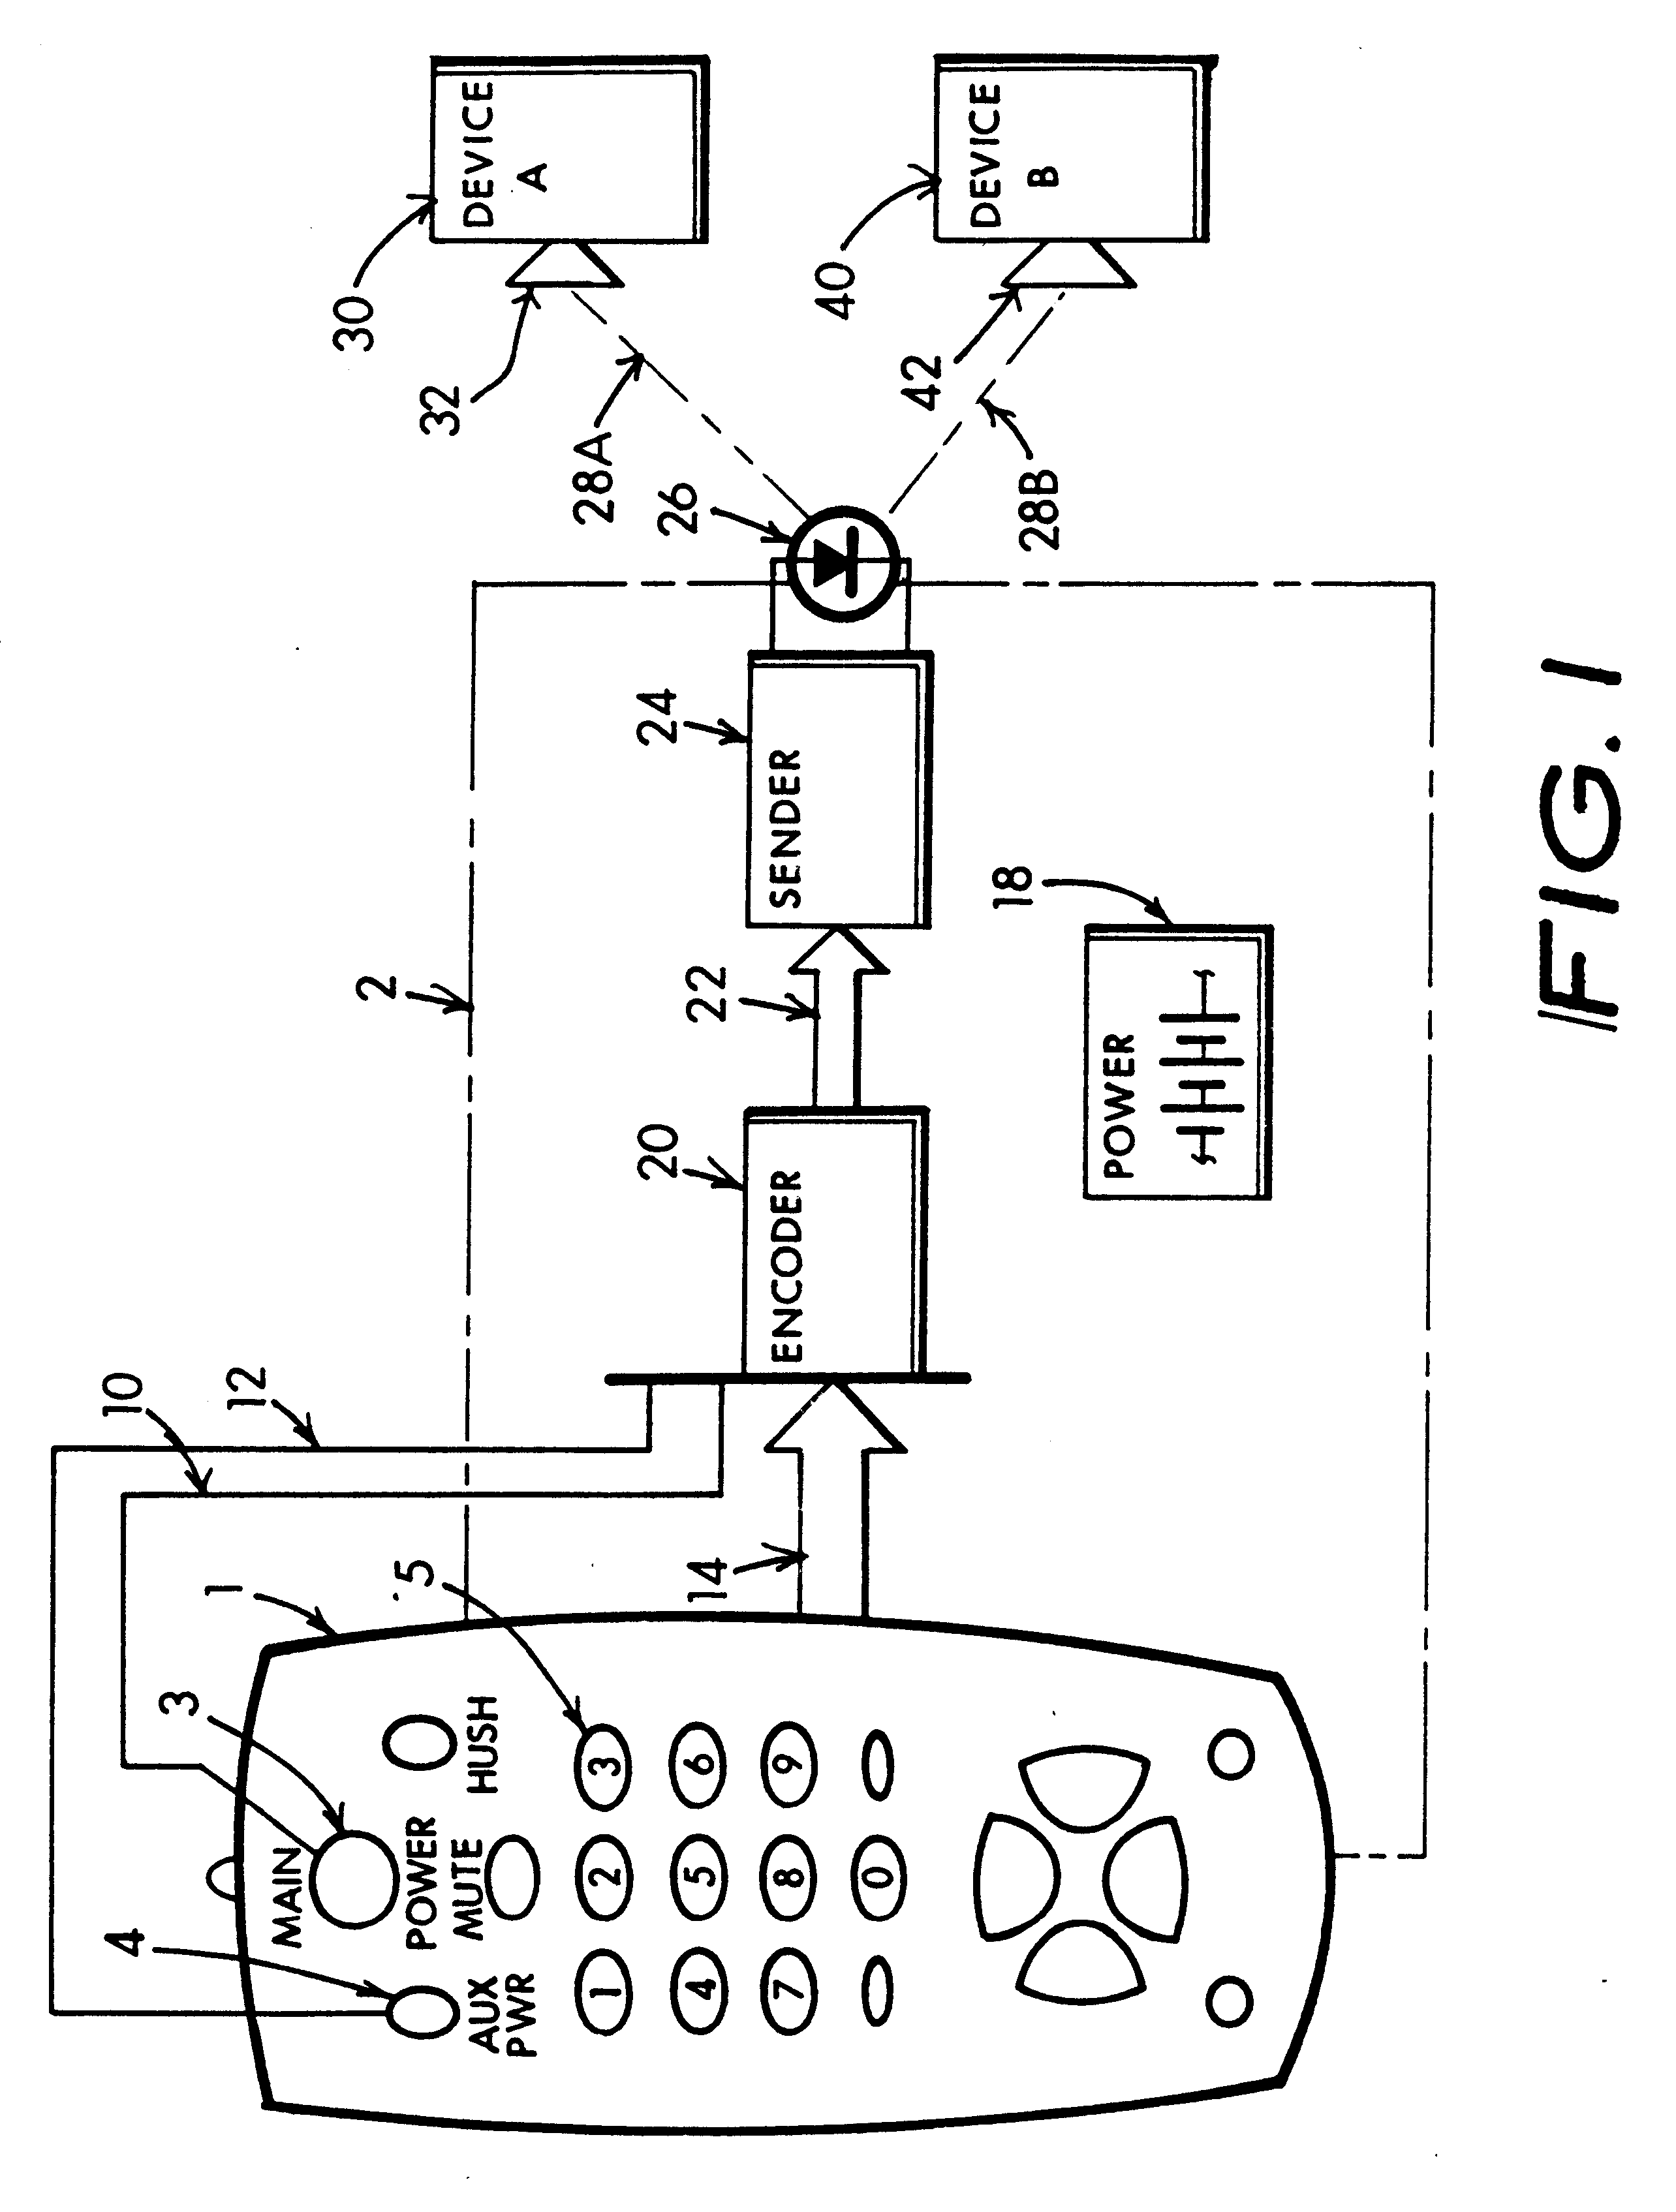 Remote controller for a multi-device television receiving system providing channel number auto-completion, presettable audio hush level and base channel auto-reaffirm